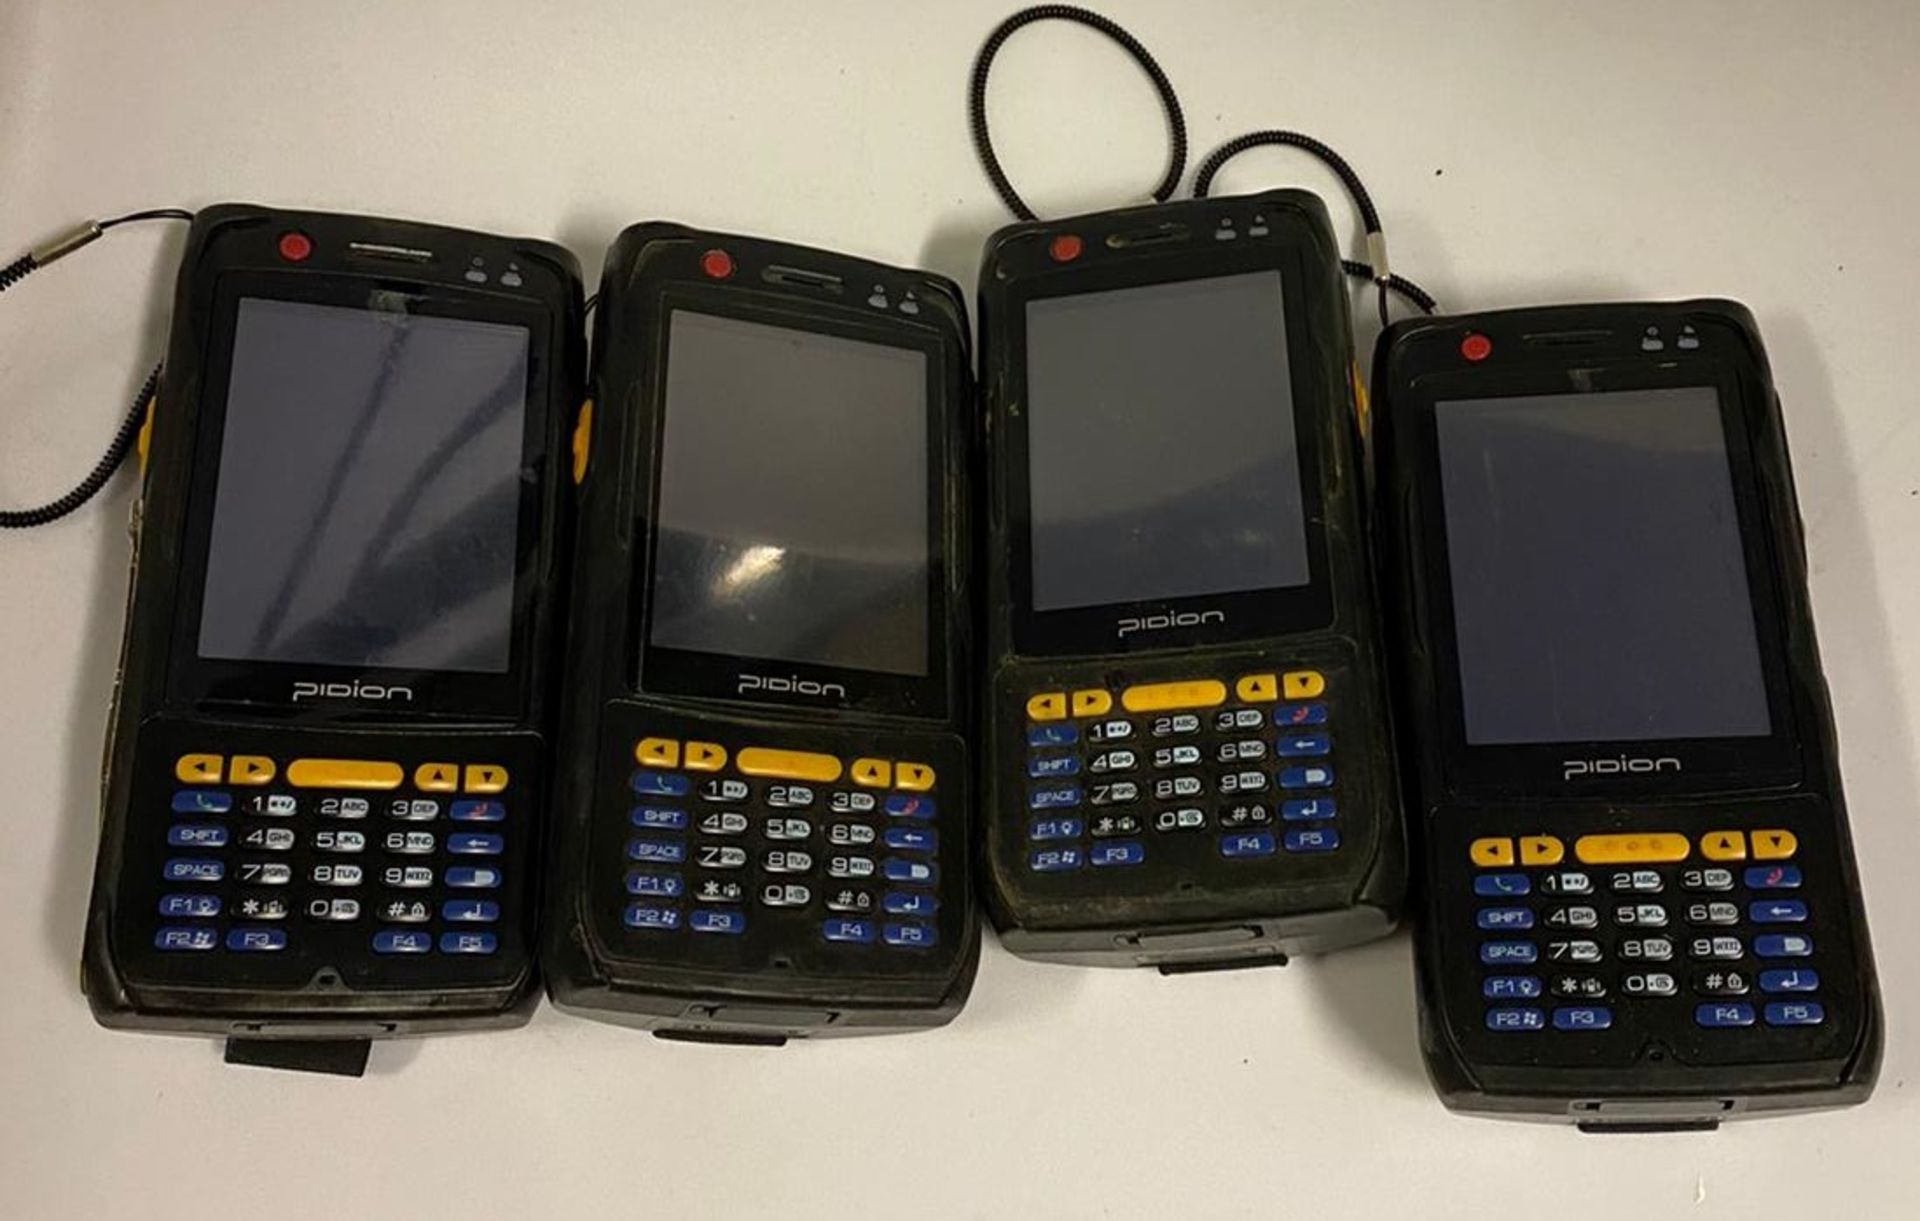 4 x Pidion BIP-6000 Mobile Handheld Computer With Barcode Scanning Capability - Used Condition - - Image 4 of 5